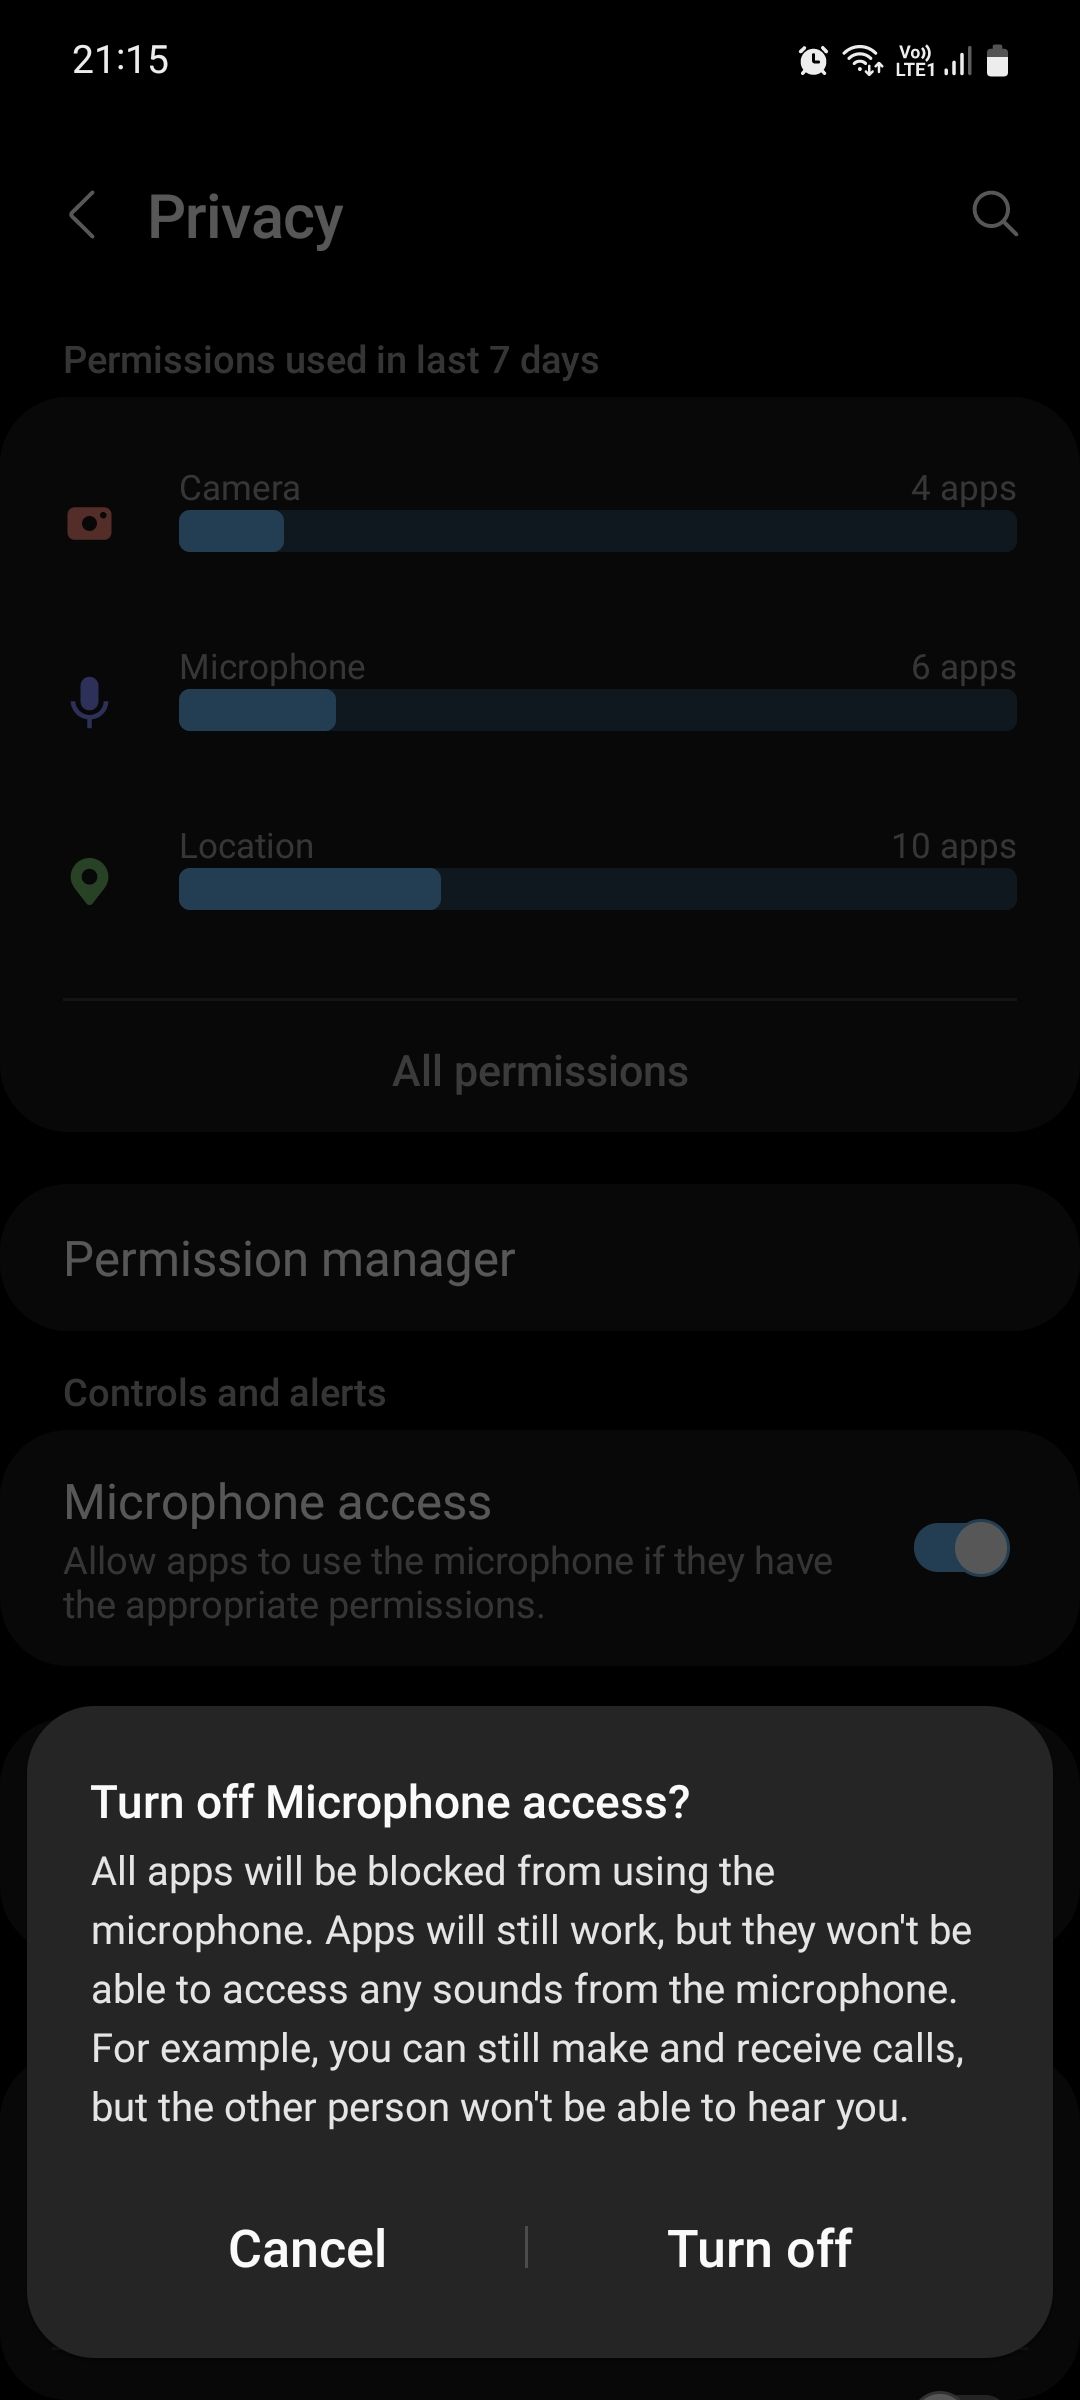 Samsung Privacy Turn off microphone access